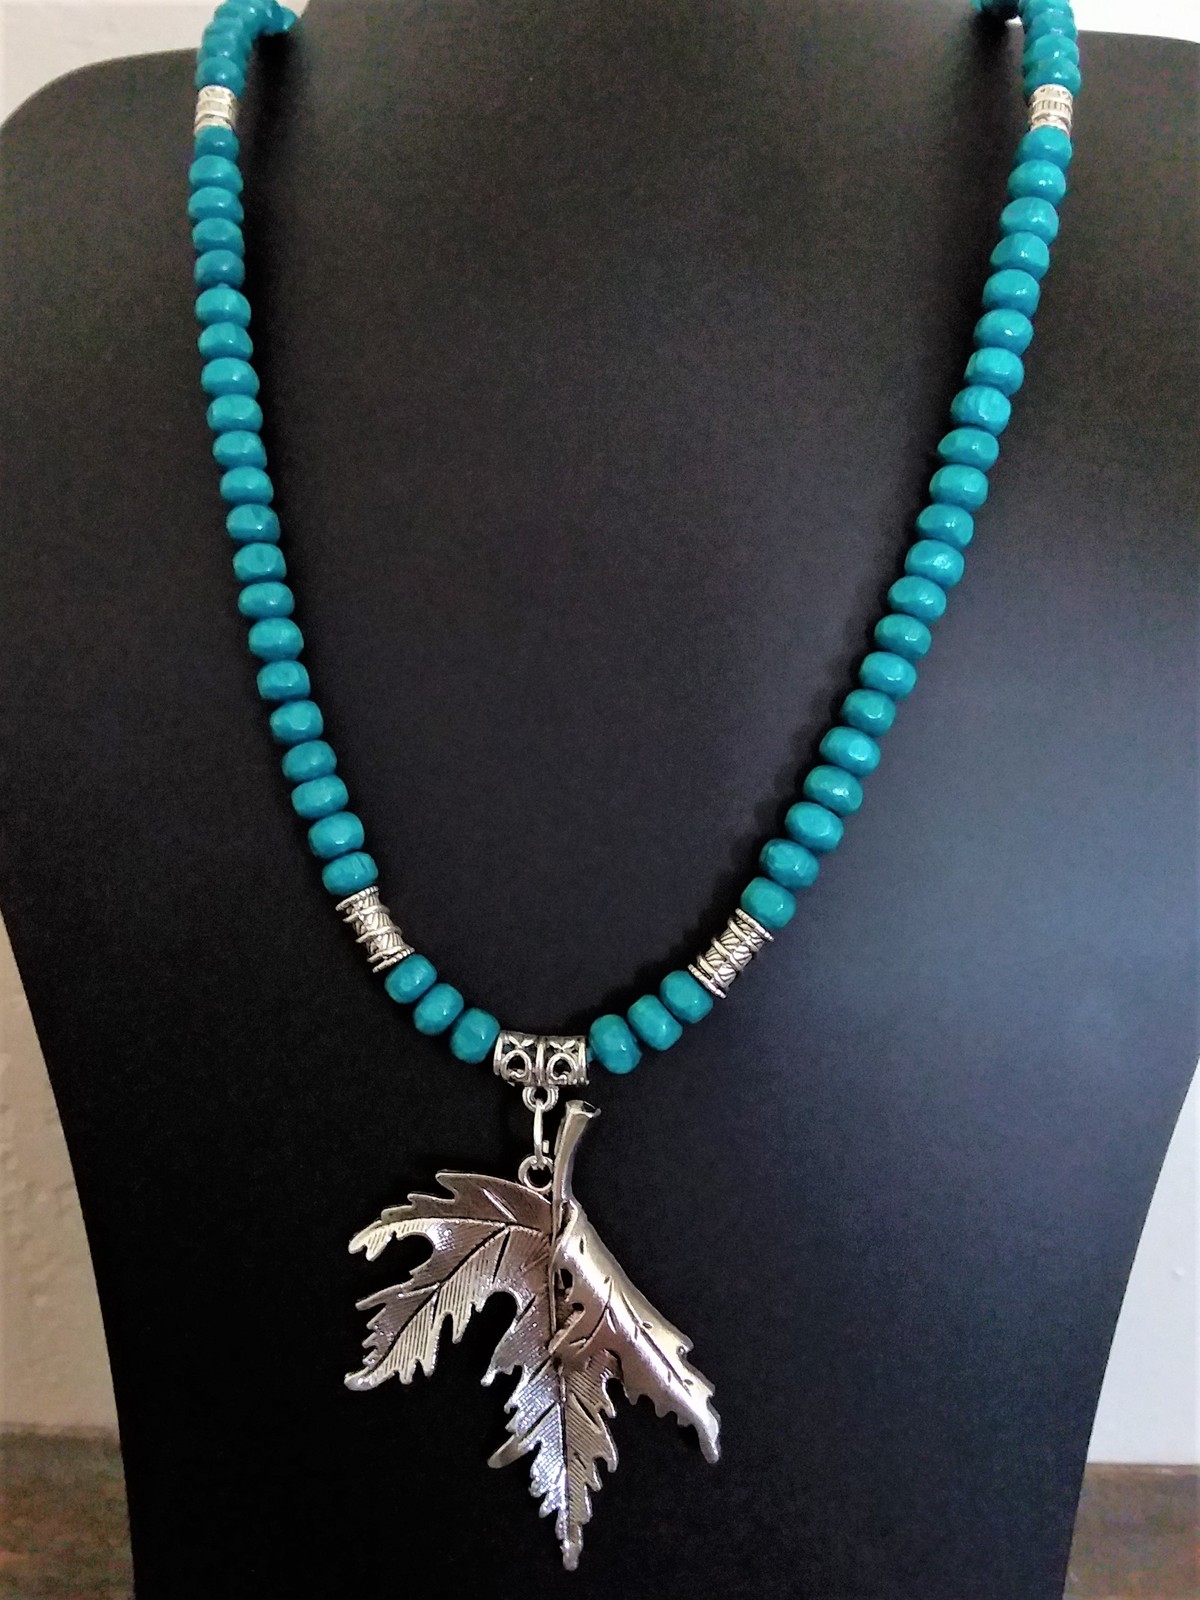 Primary image for Antique Silver Tone Pendant On Leather Cord With Turquoise/Silver Accent Beads